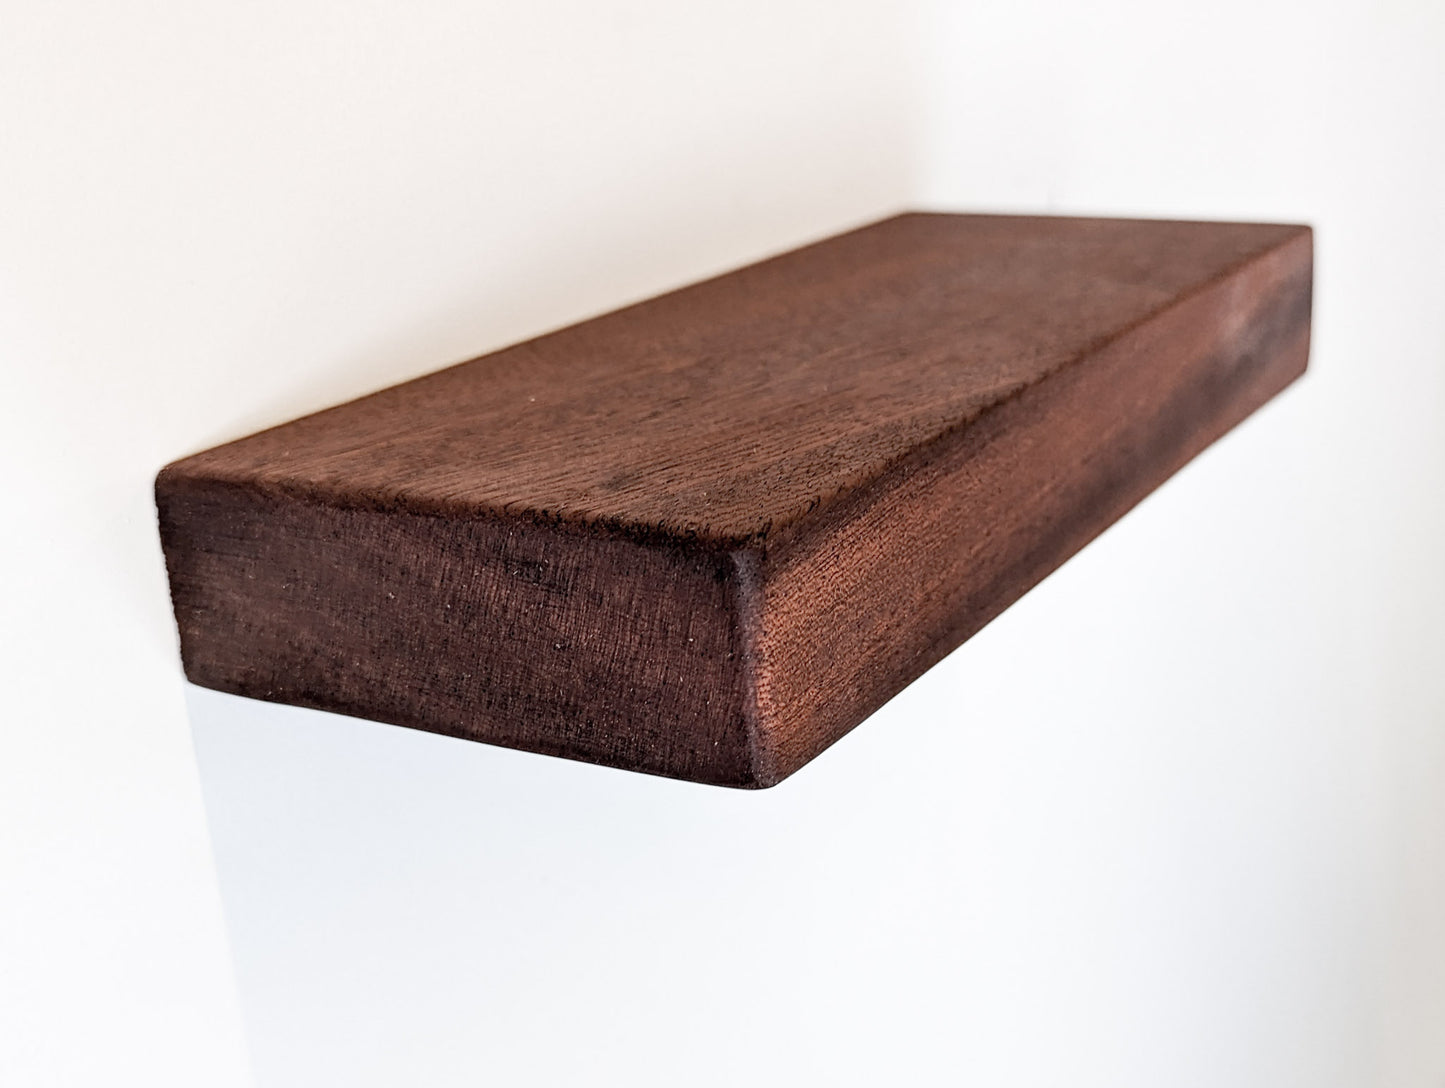 A mahogany shelf with beautiful beveled edges and finished with Danish oil.